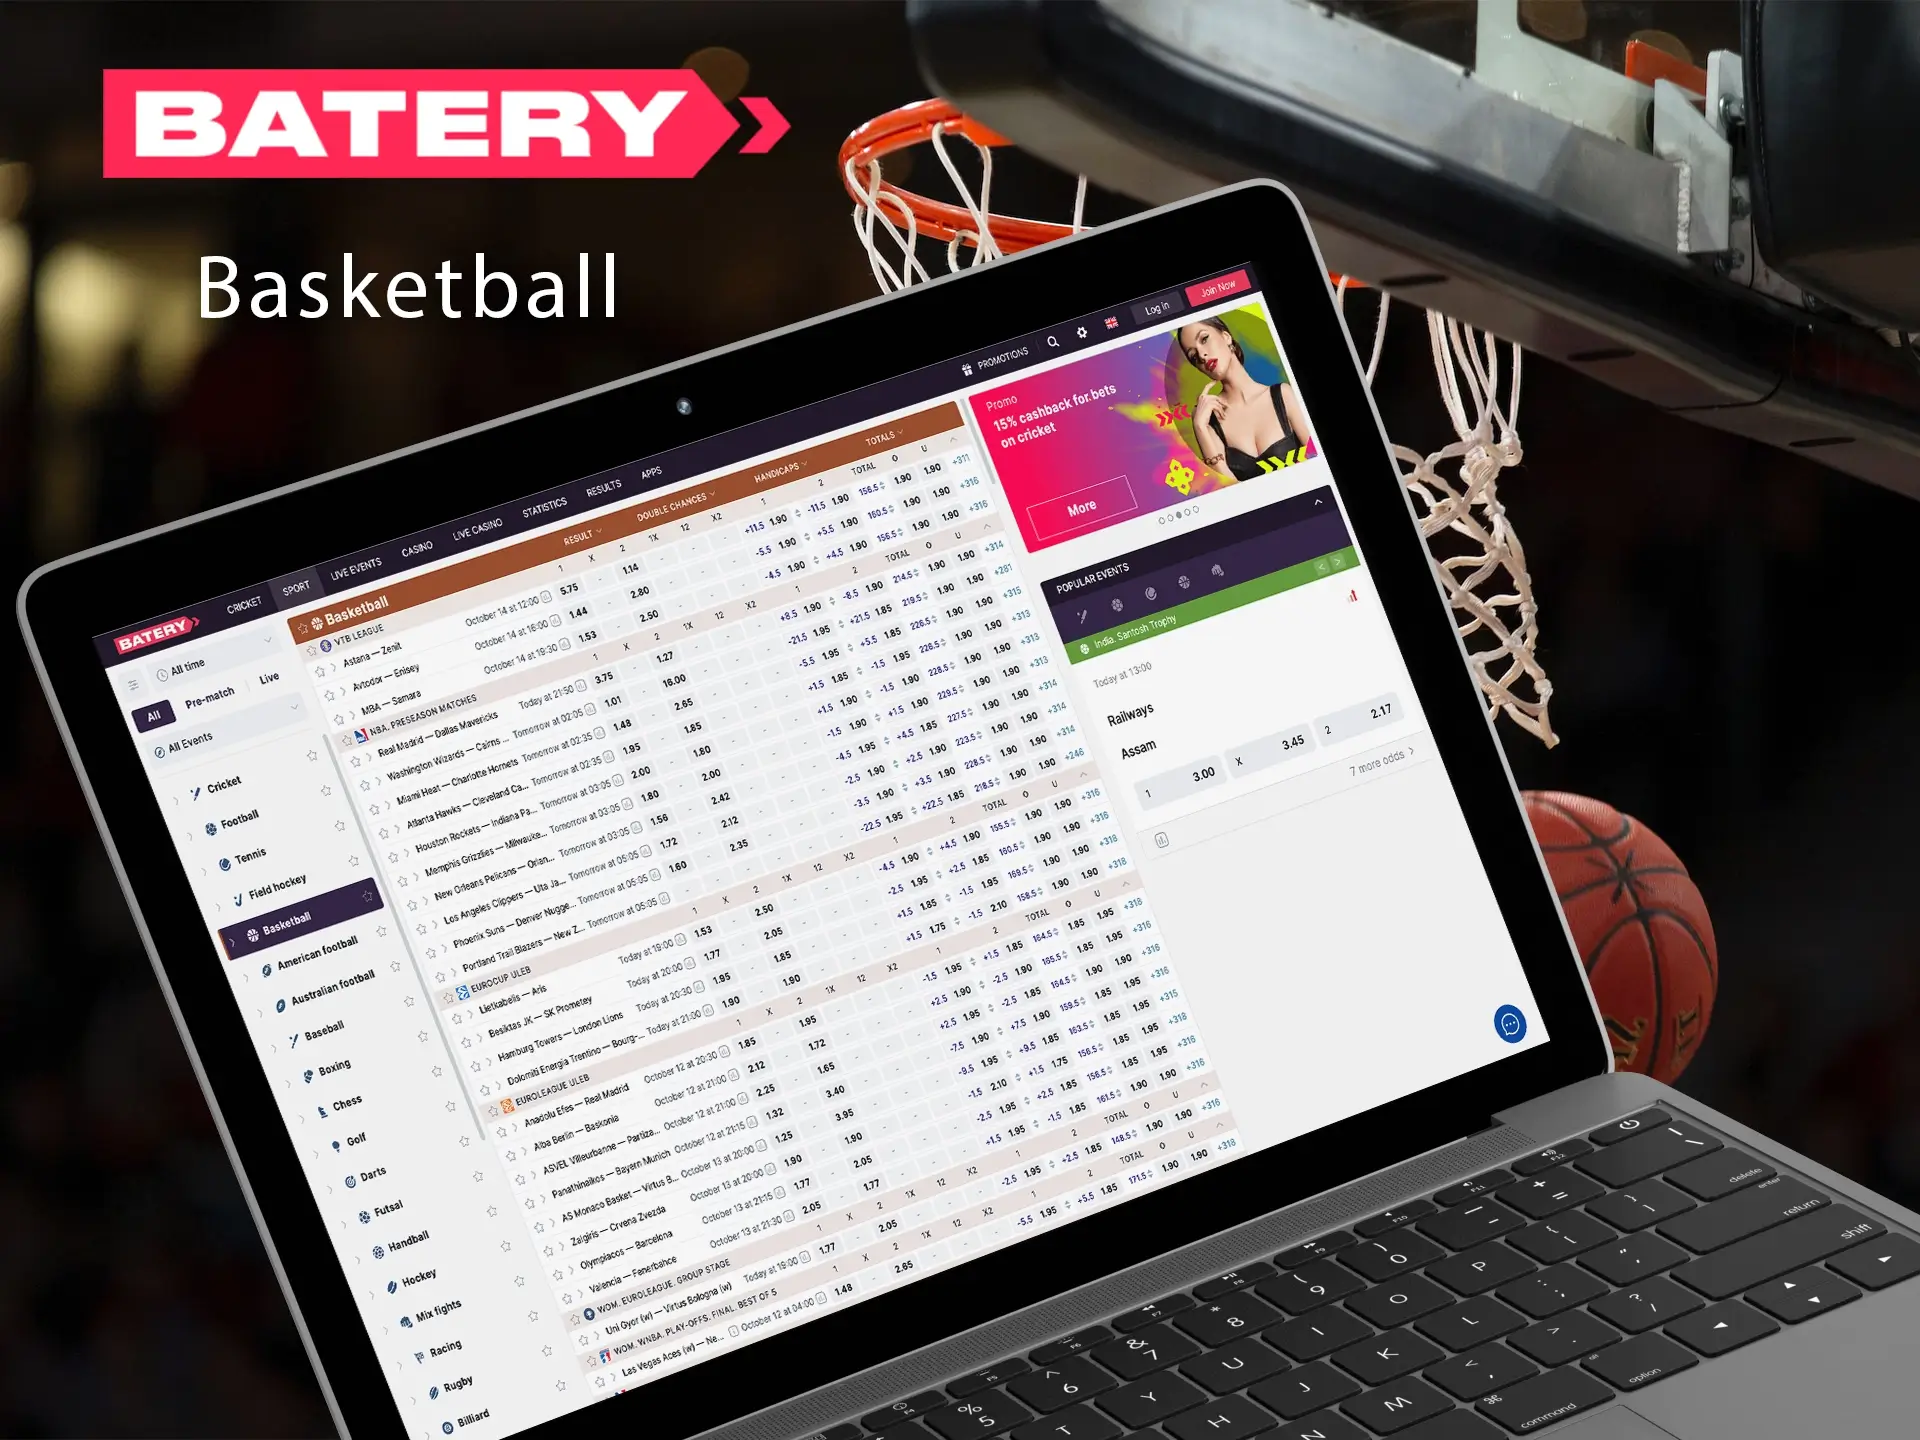 Basketball is the sport of the strong in body and spirit, place your bets with Batery.